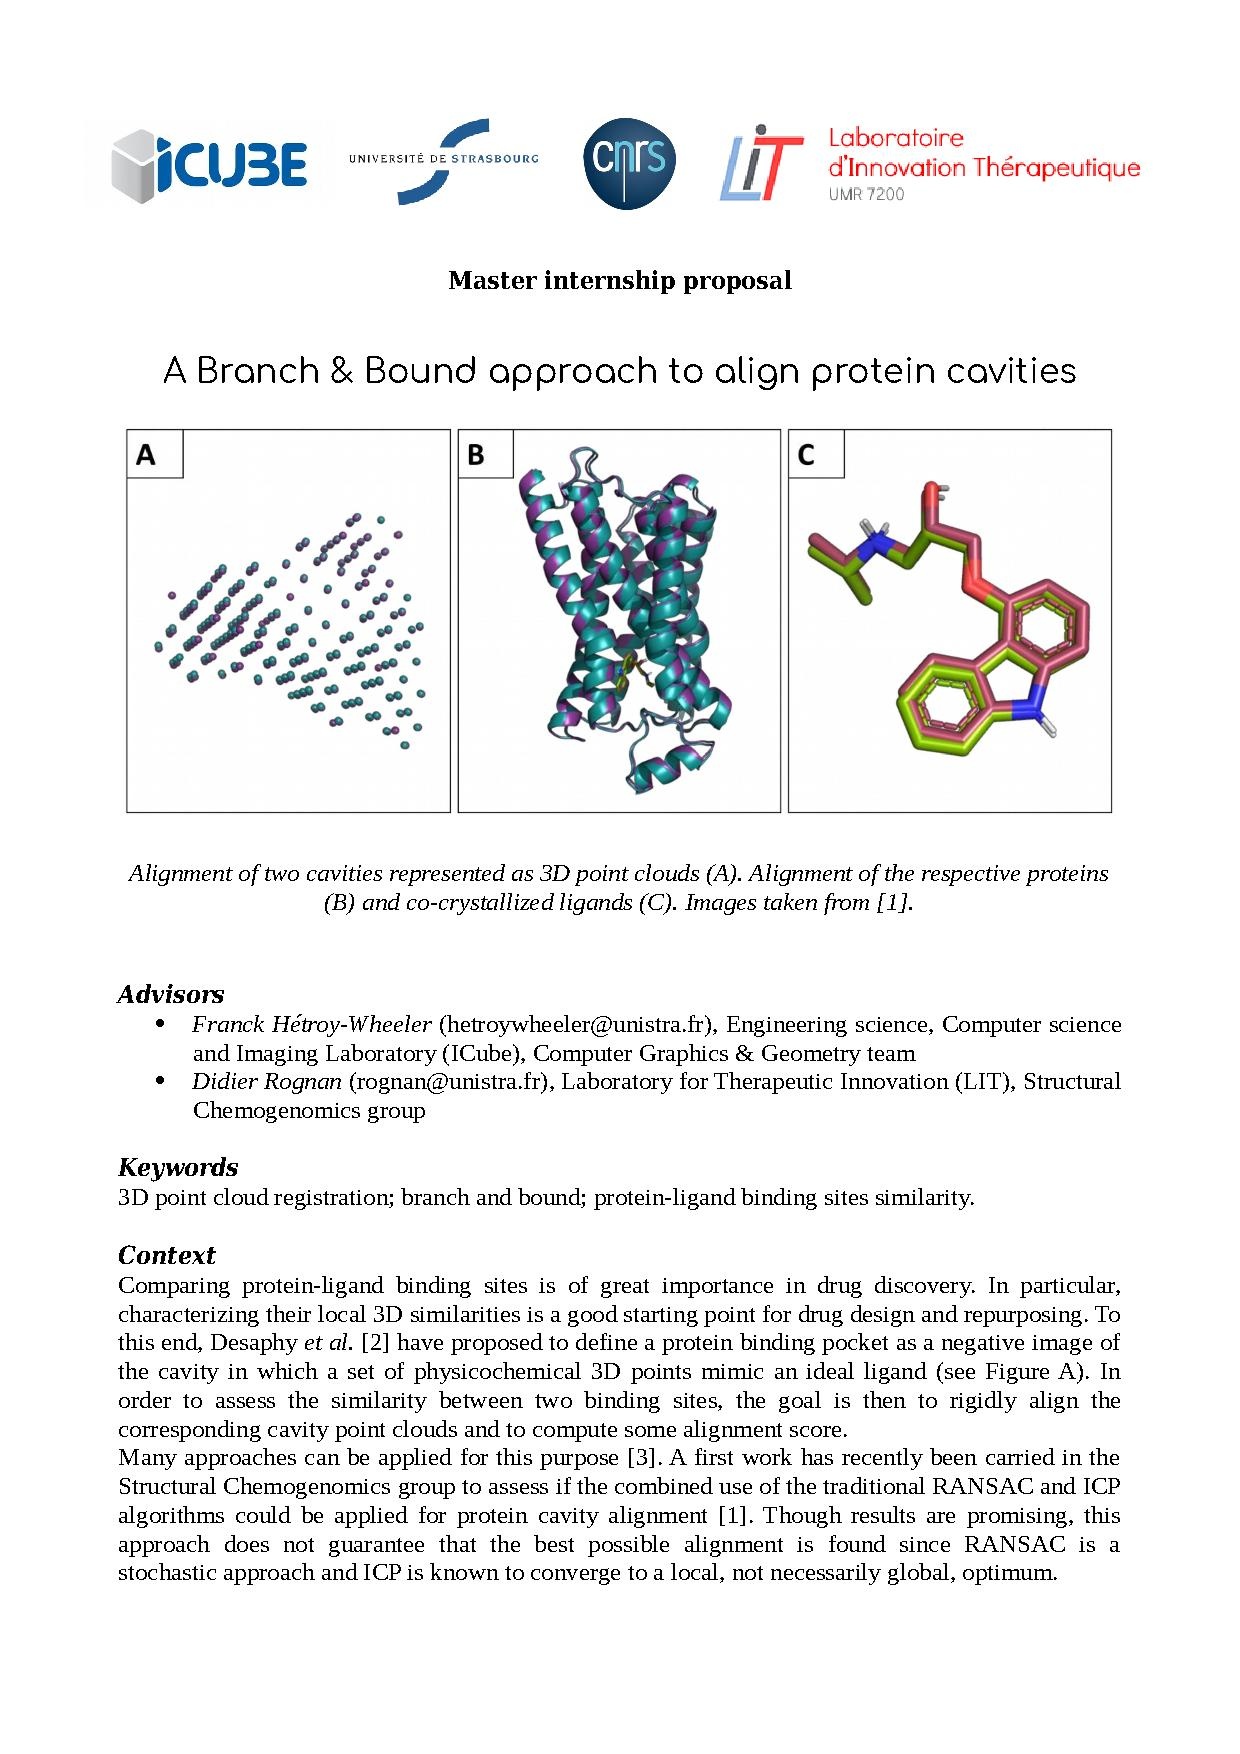 A Branch and Bound approach to align protein cavities